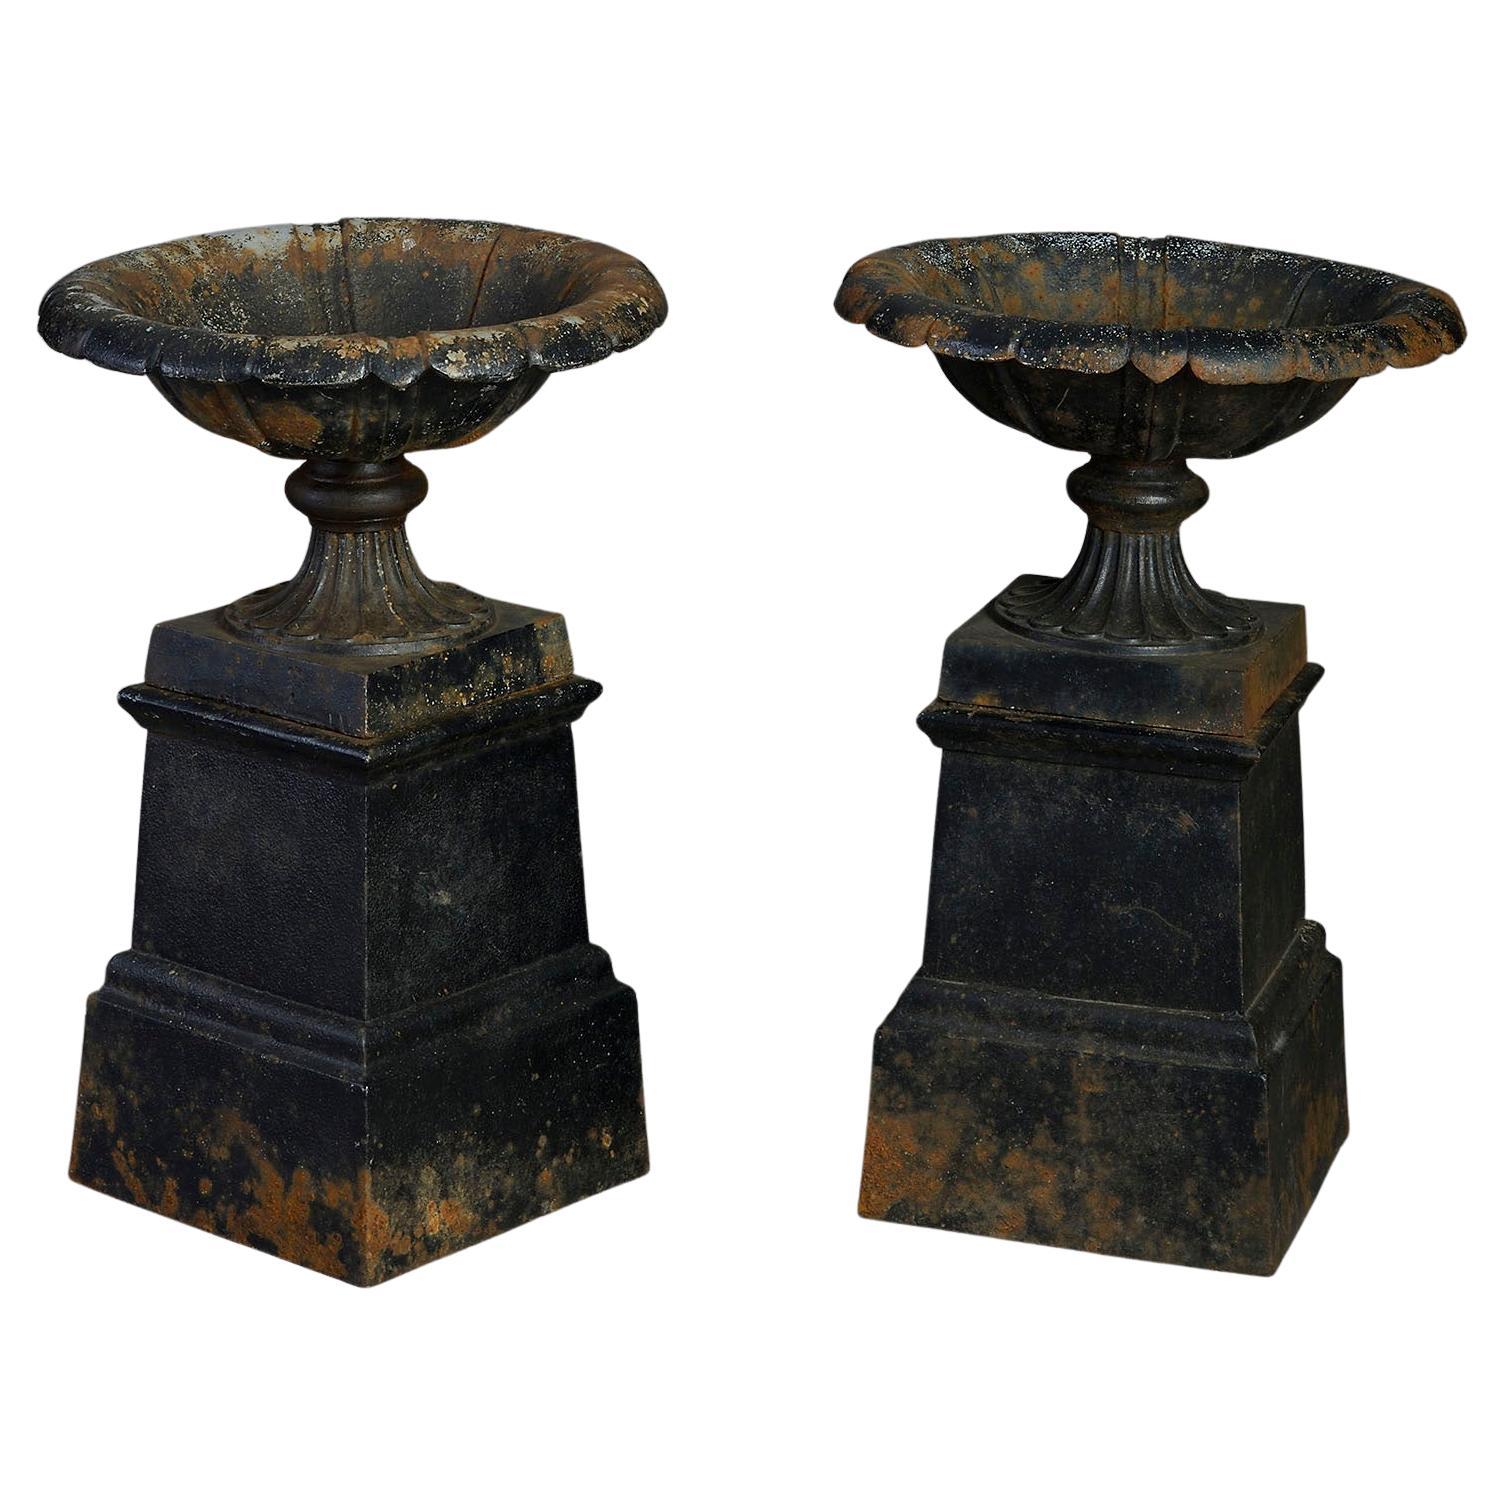 Pair of Mid-19th Century Cast Iron Tazze For Sale